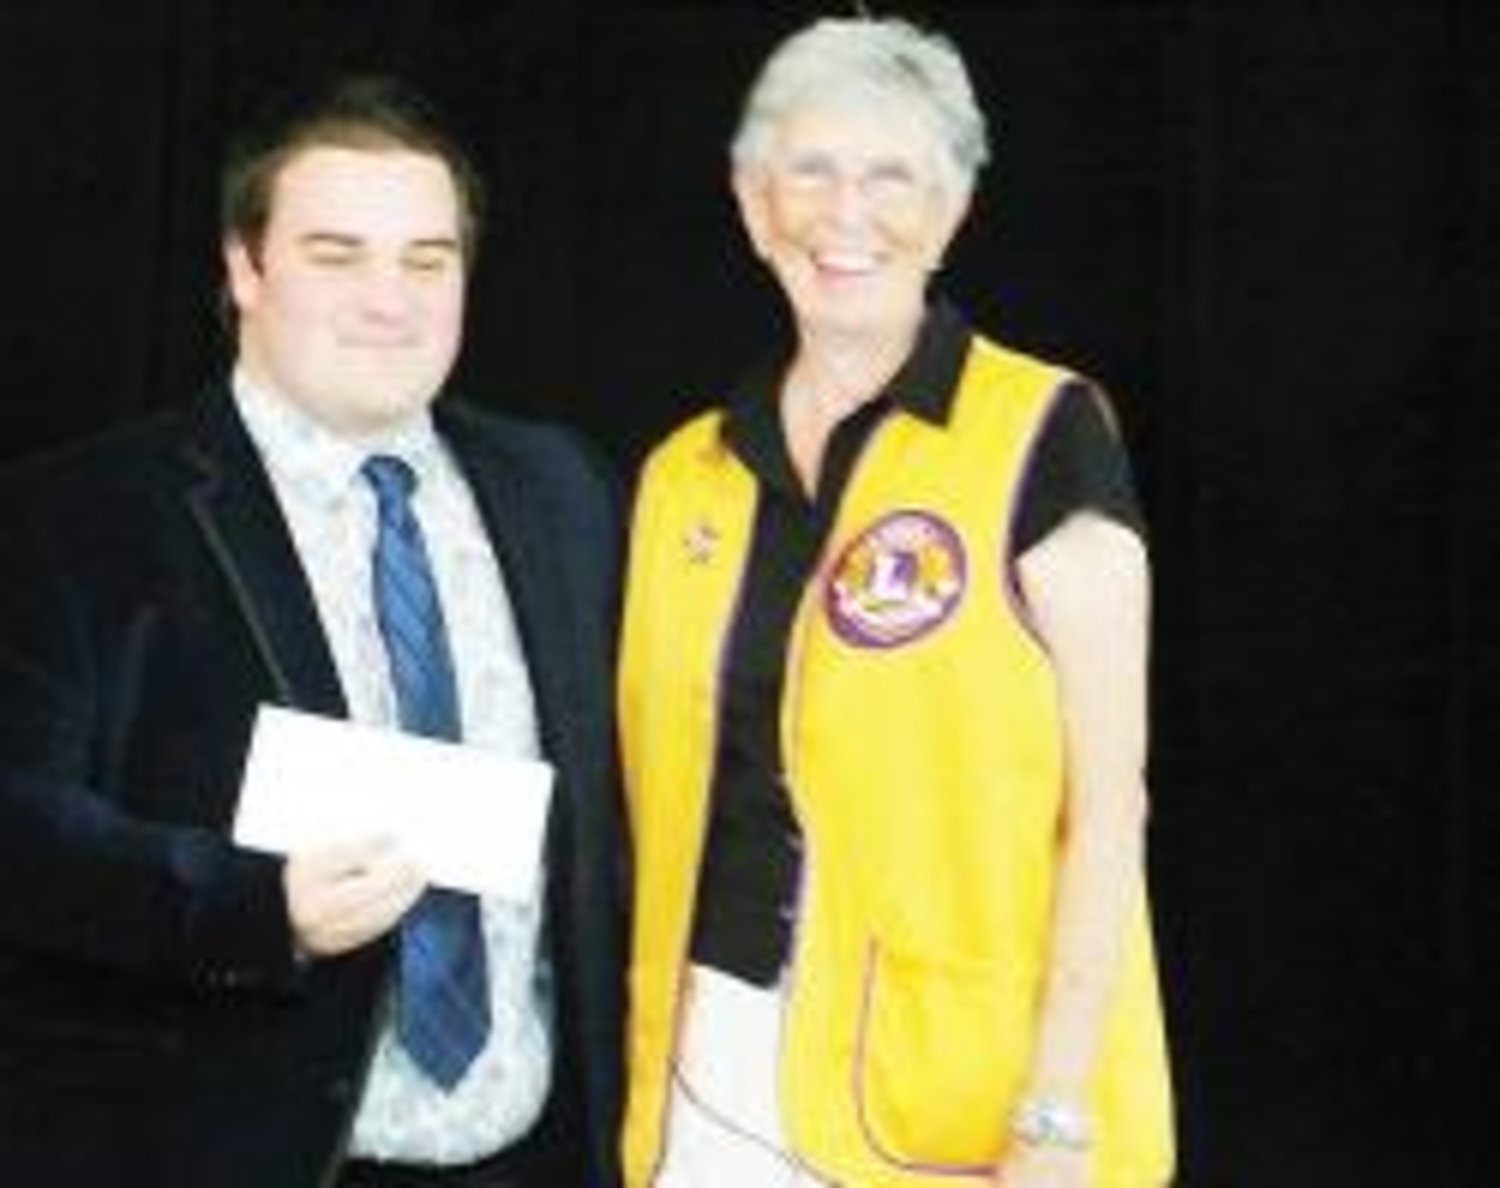 The Yantis-Lake Fork Lions Club awarded the Lion Bernie Shoemaker scholarship in the amount of $1,000.00 to Caleb Isaac Allen of the Yantis Independent School District. Allen was the salutatorian of the 2014 graduating class of Yantis High School. The scholarship was presented by Lion Betty Stribley at the Yantis ISD's Scholarship Program on June 4, 2014.